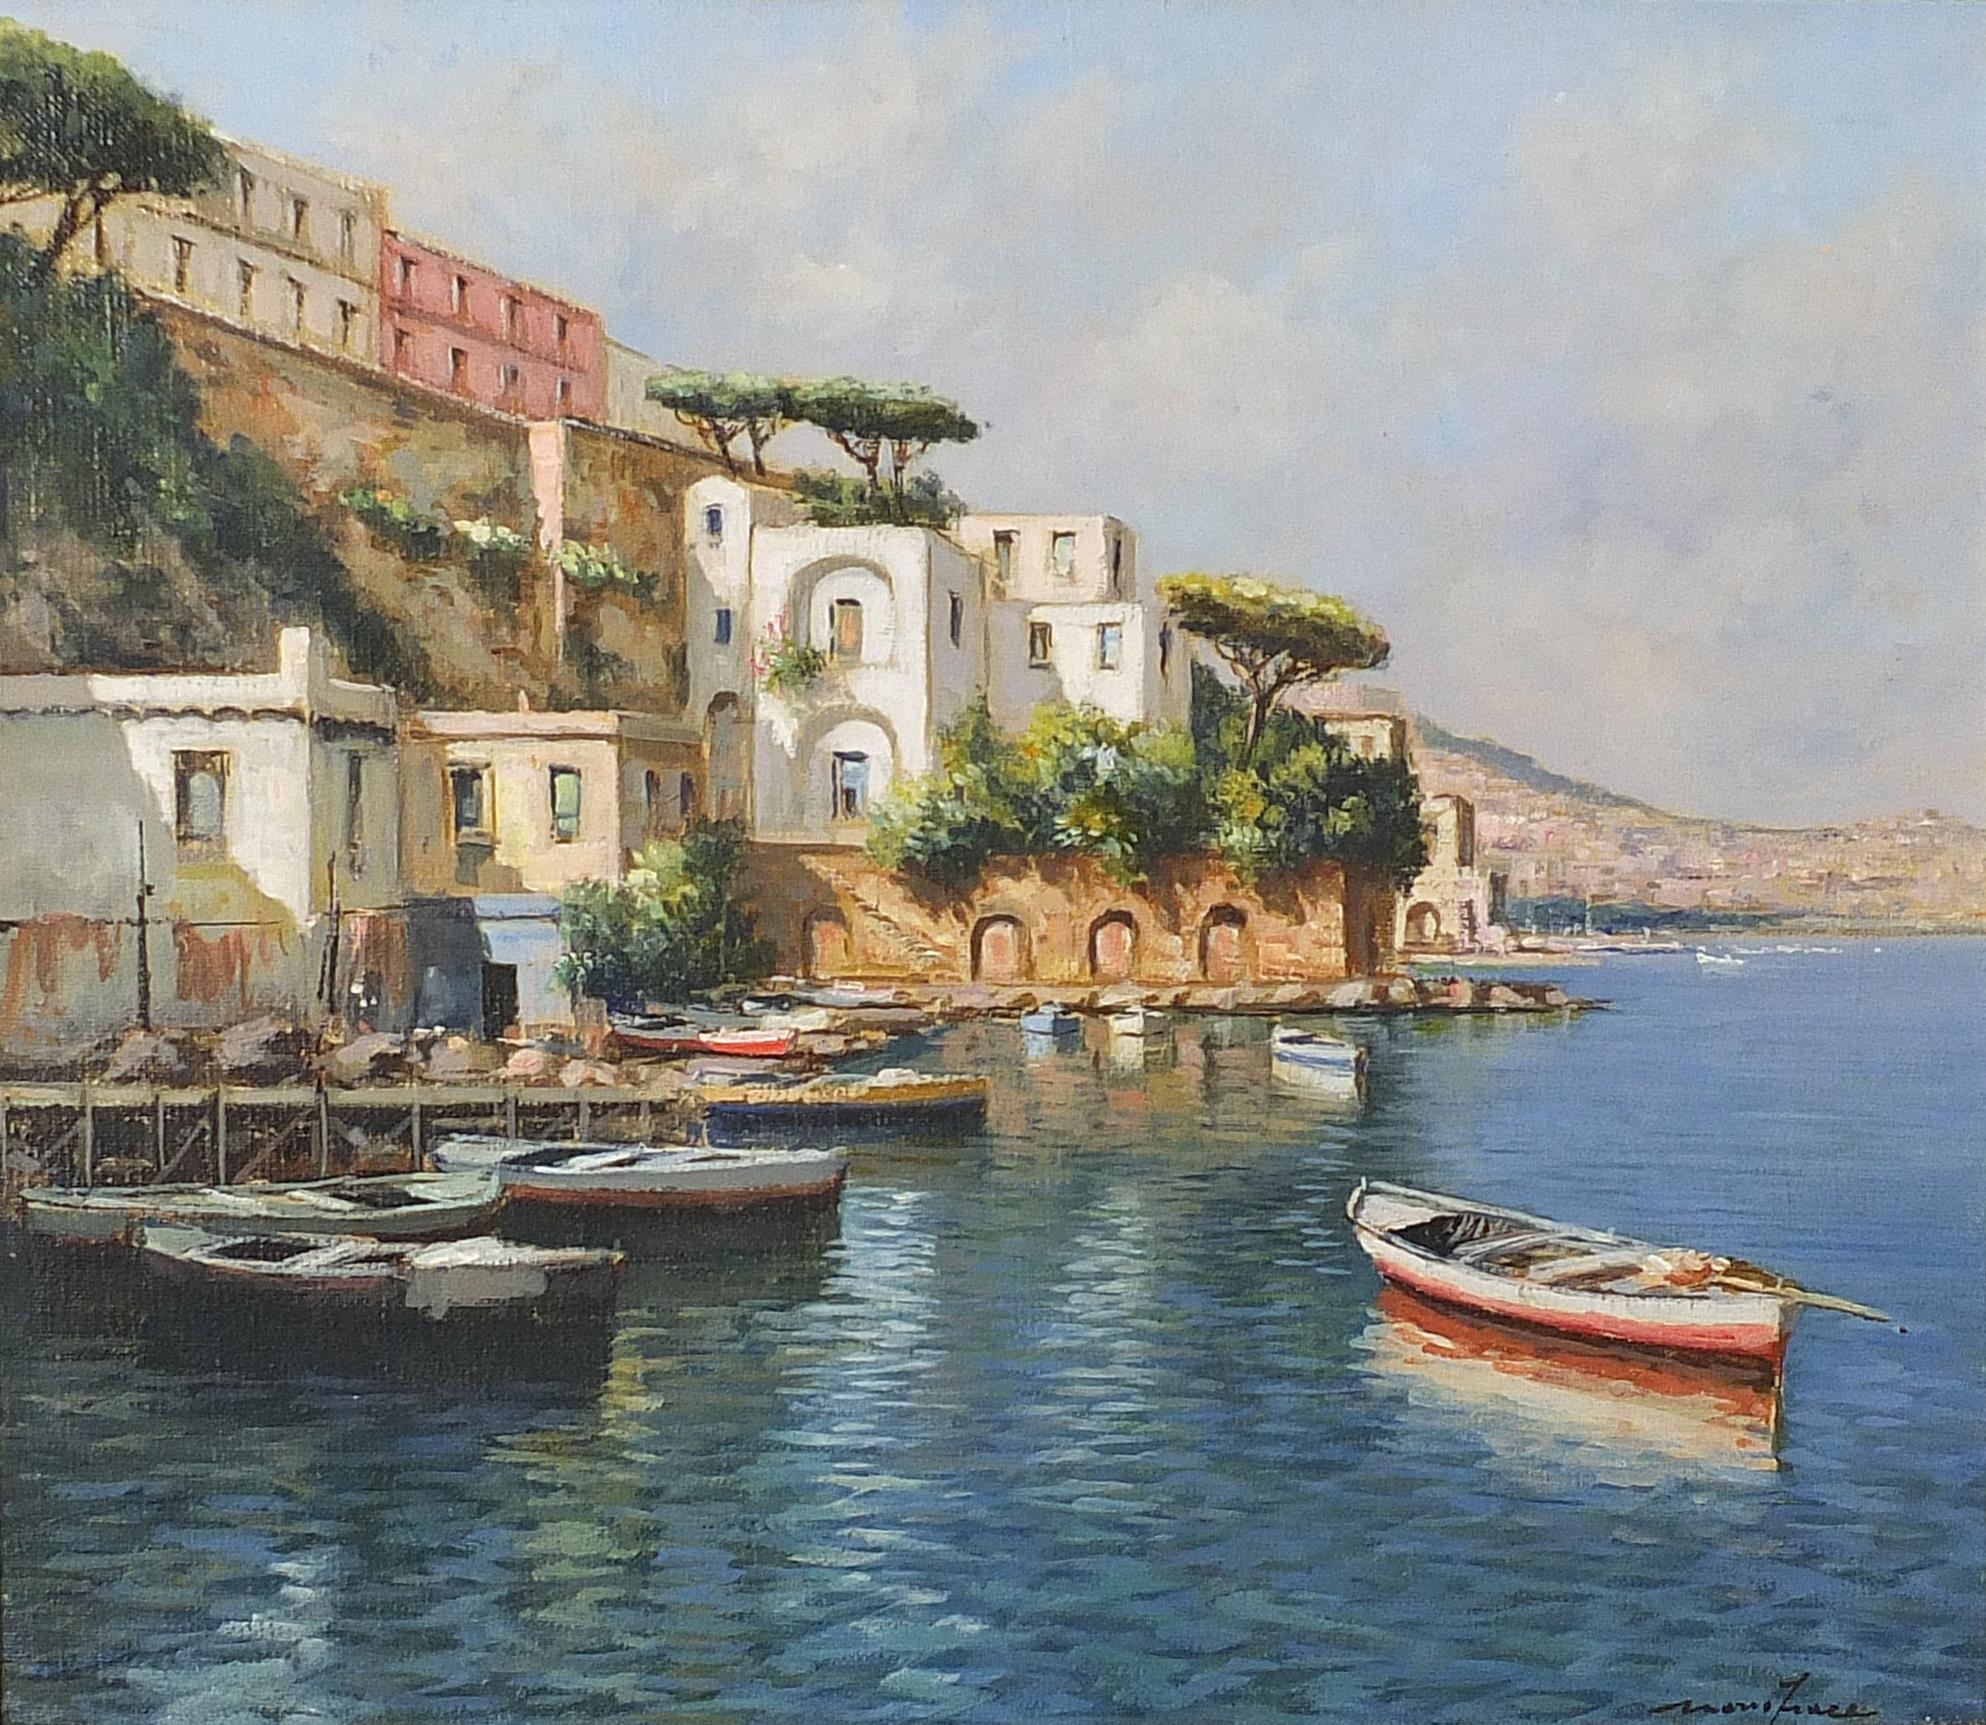 Mario Irace - Moored boats beside villas, Italian oil on canvas, with booklet, mounted and framed,